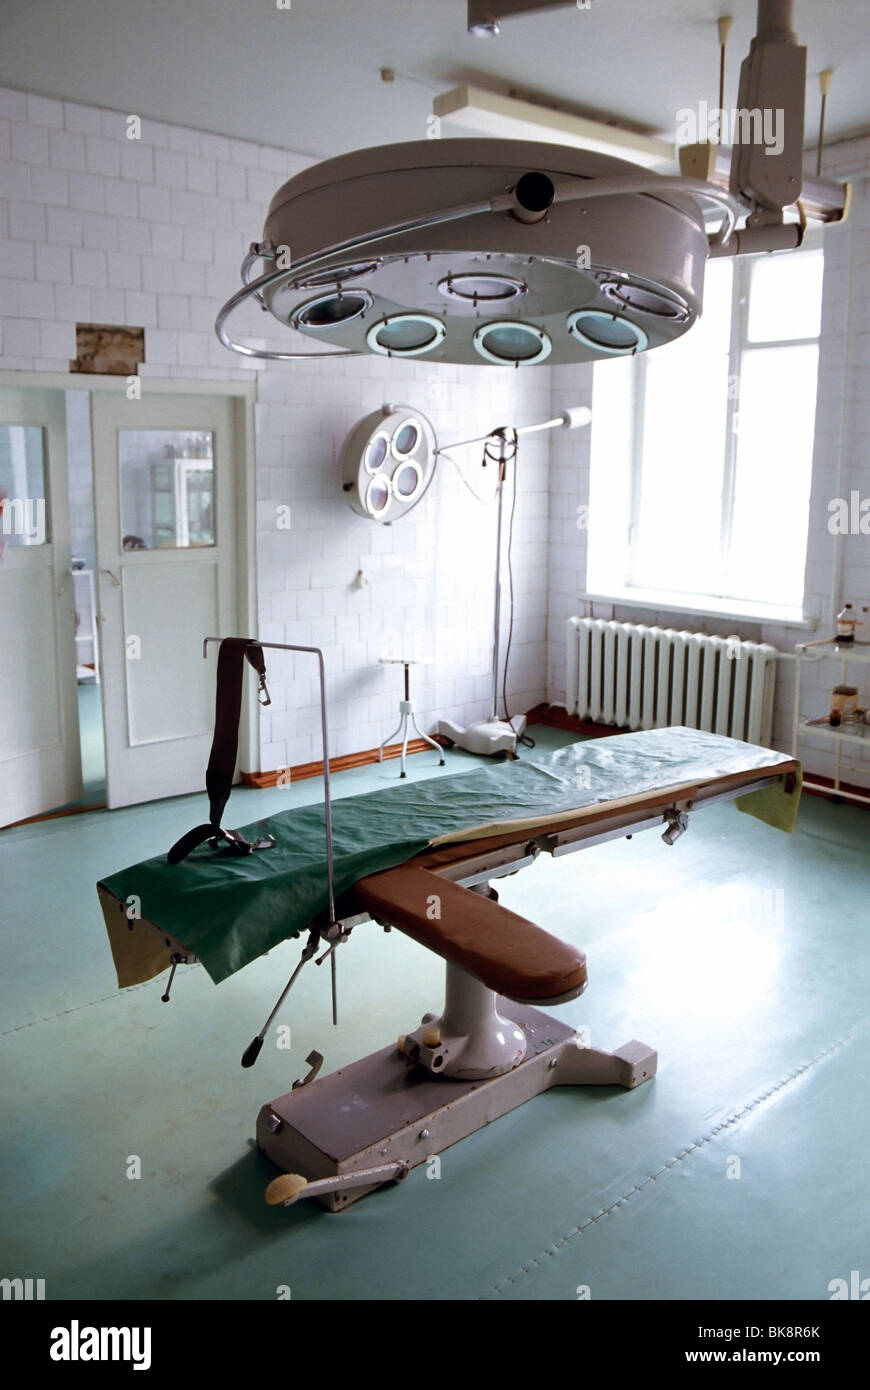 hospital-operating-room-in-the-former-so